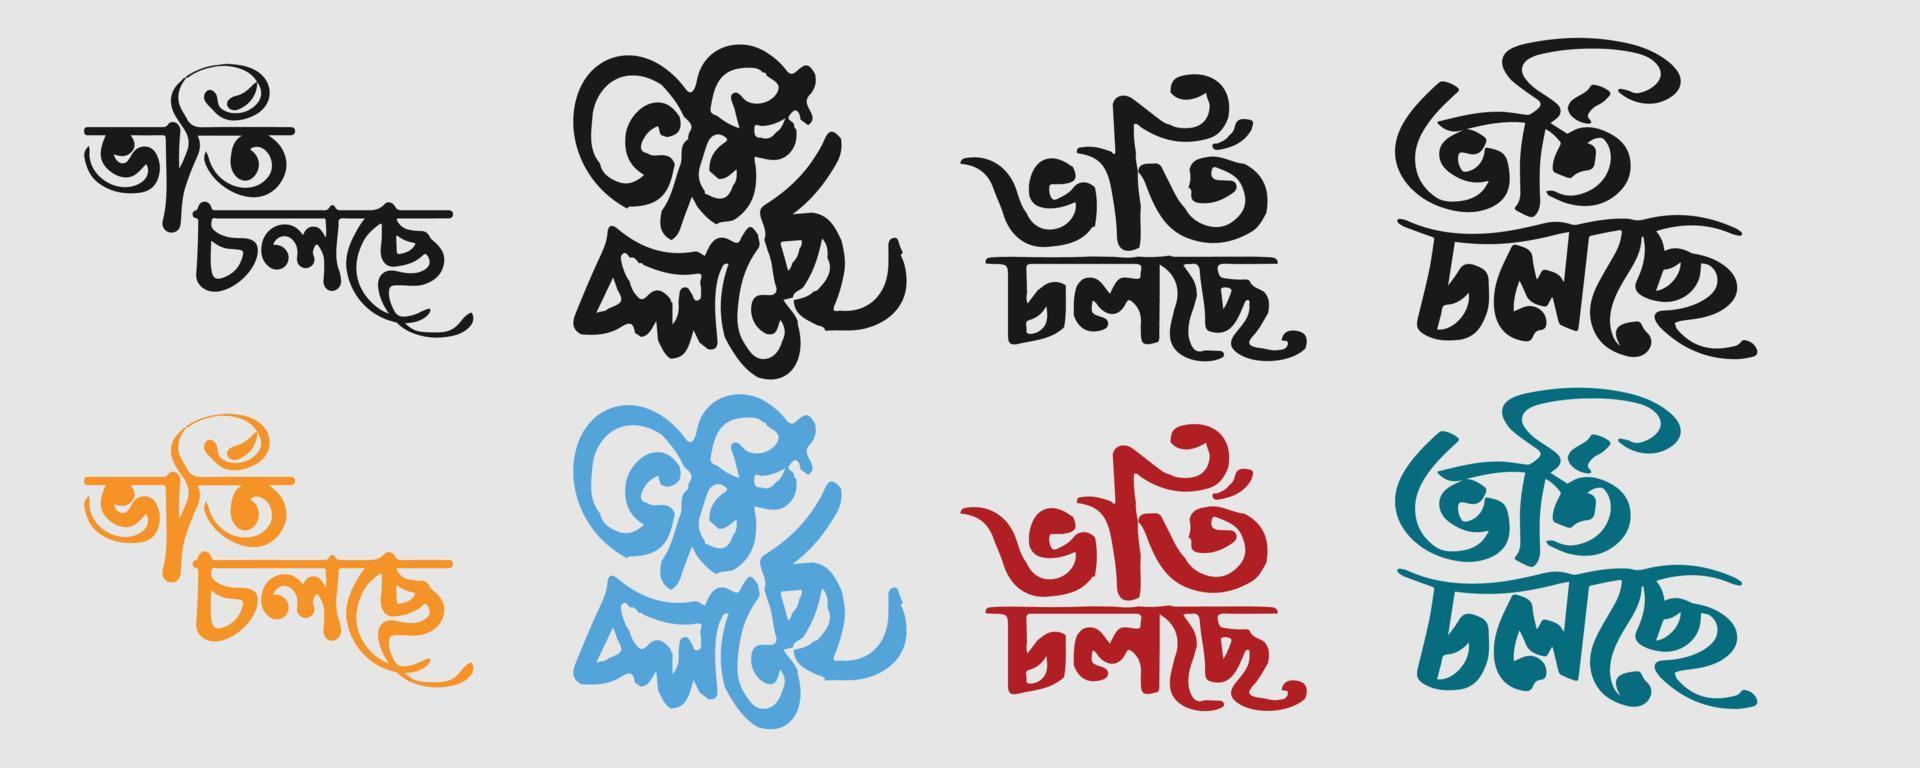 Bangla Typography And Lettering Design of School Admission Going On offering Banner, Poster, Template. Bengali Typography of Vorti Cholse Vector